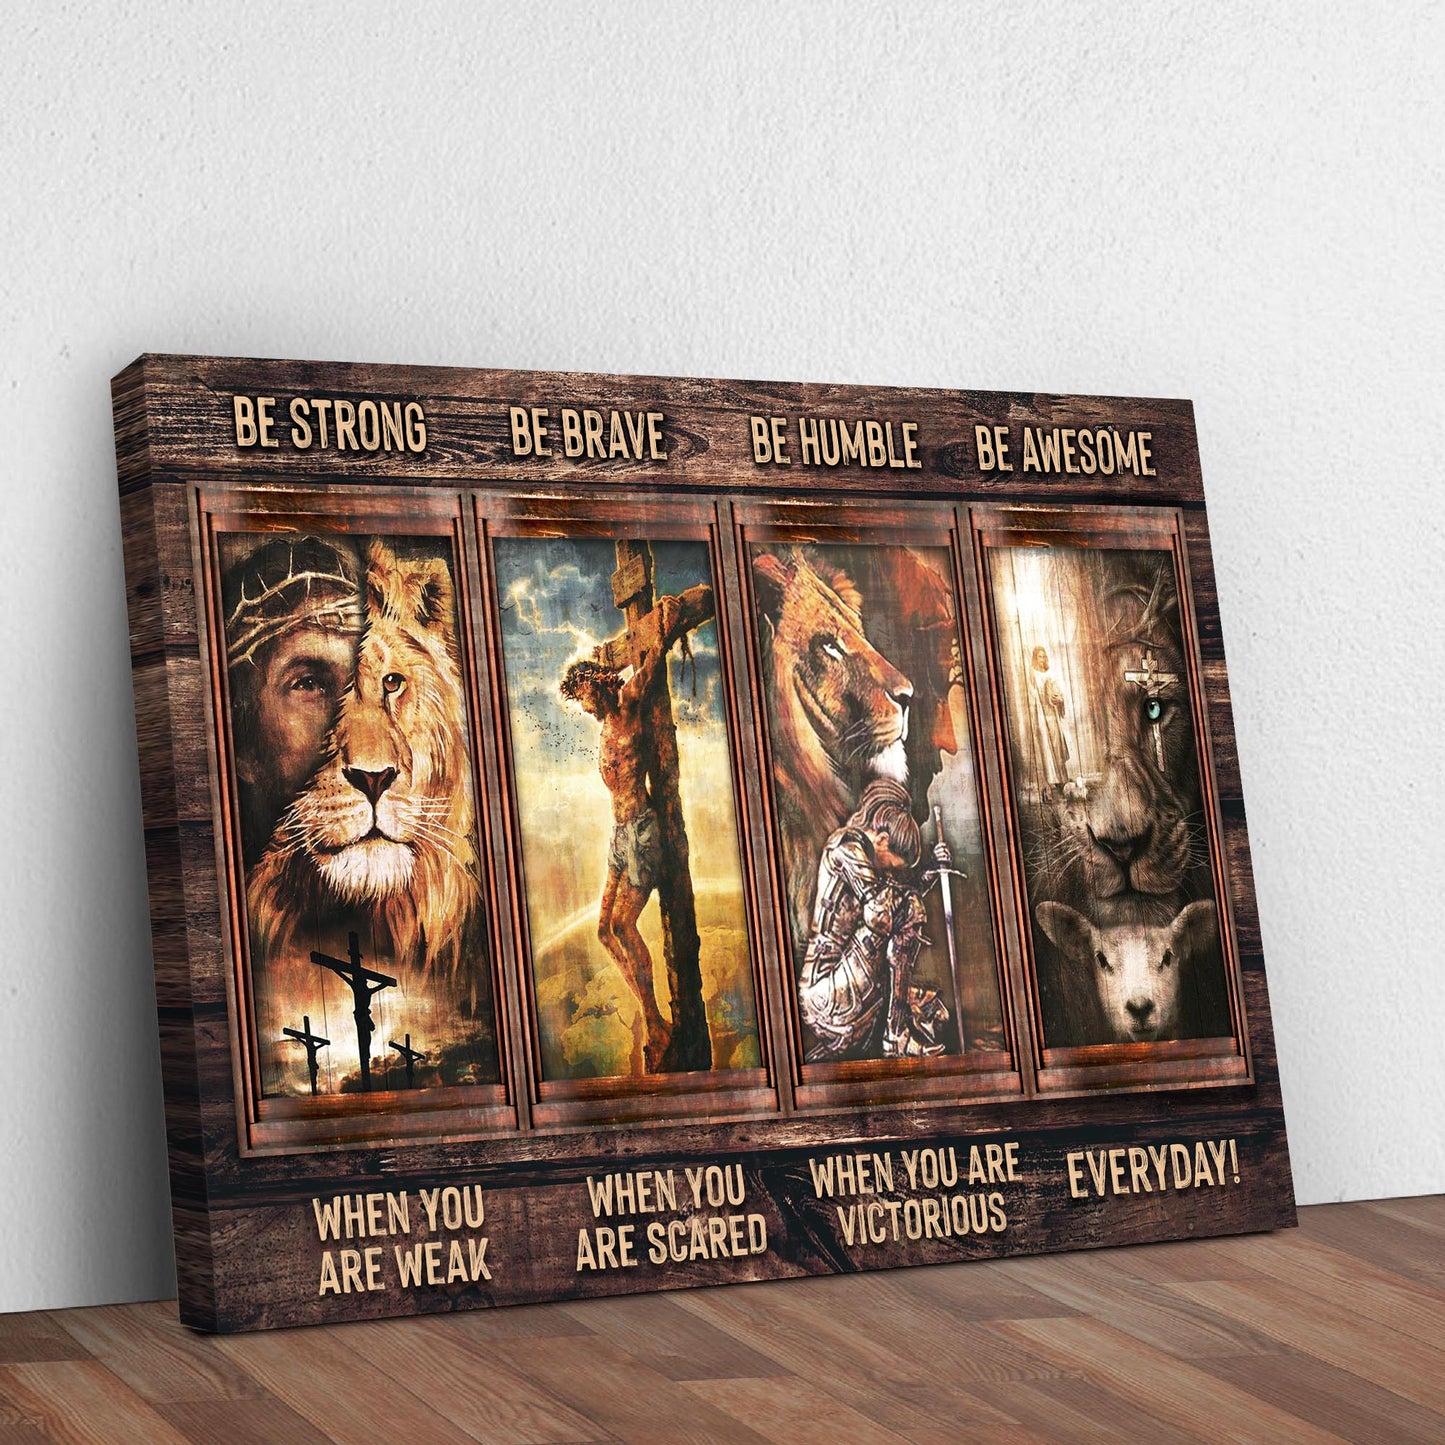 Be Strong, Be Brave, Be Humble, Be Awesome Canvas - Dynamic Christian Wall Art, Jesus Decor